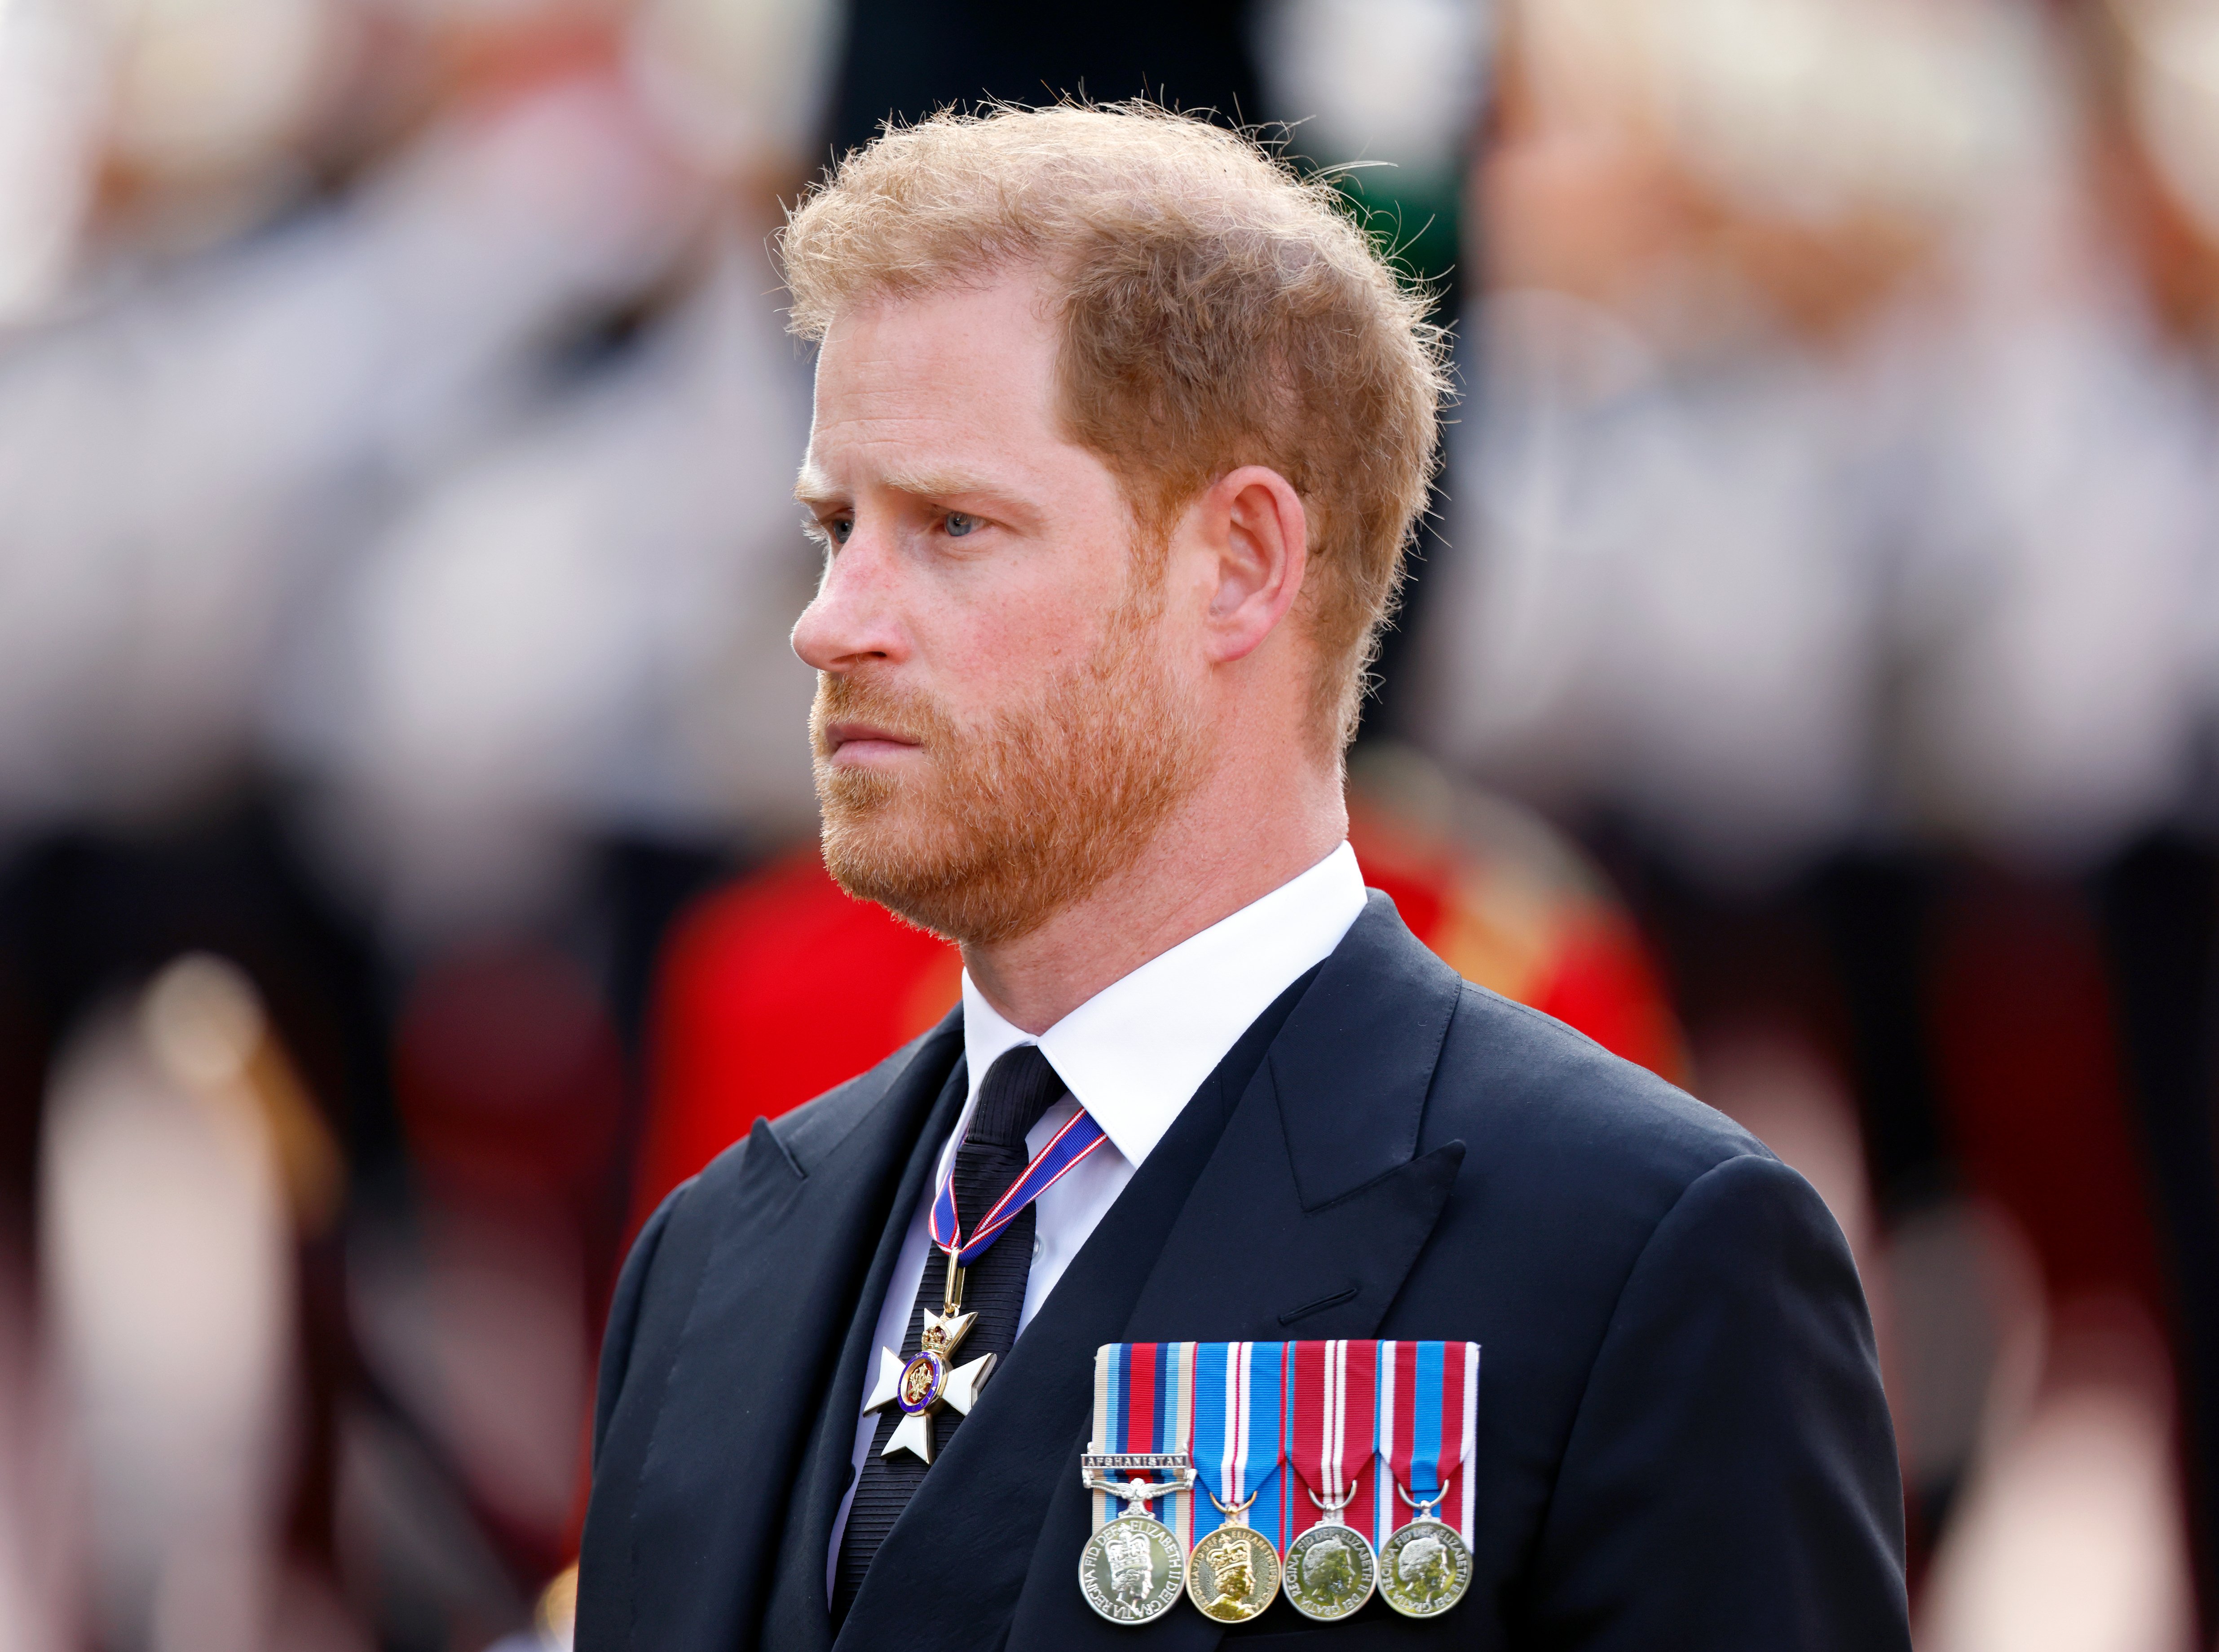 Prince Harry, Duke of Sussex, walks behind Queen Elizabeth II's coffin as it is transported on a gun carriage from Buckingham Palace to The Palace of Westminster ahead of her Lying-in-State on September 14, 2022, in London, United Kingdom. | Source: Getty Images